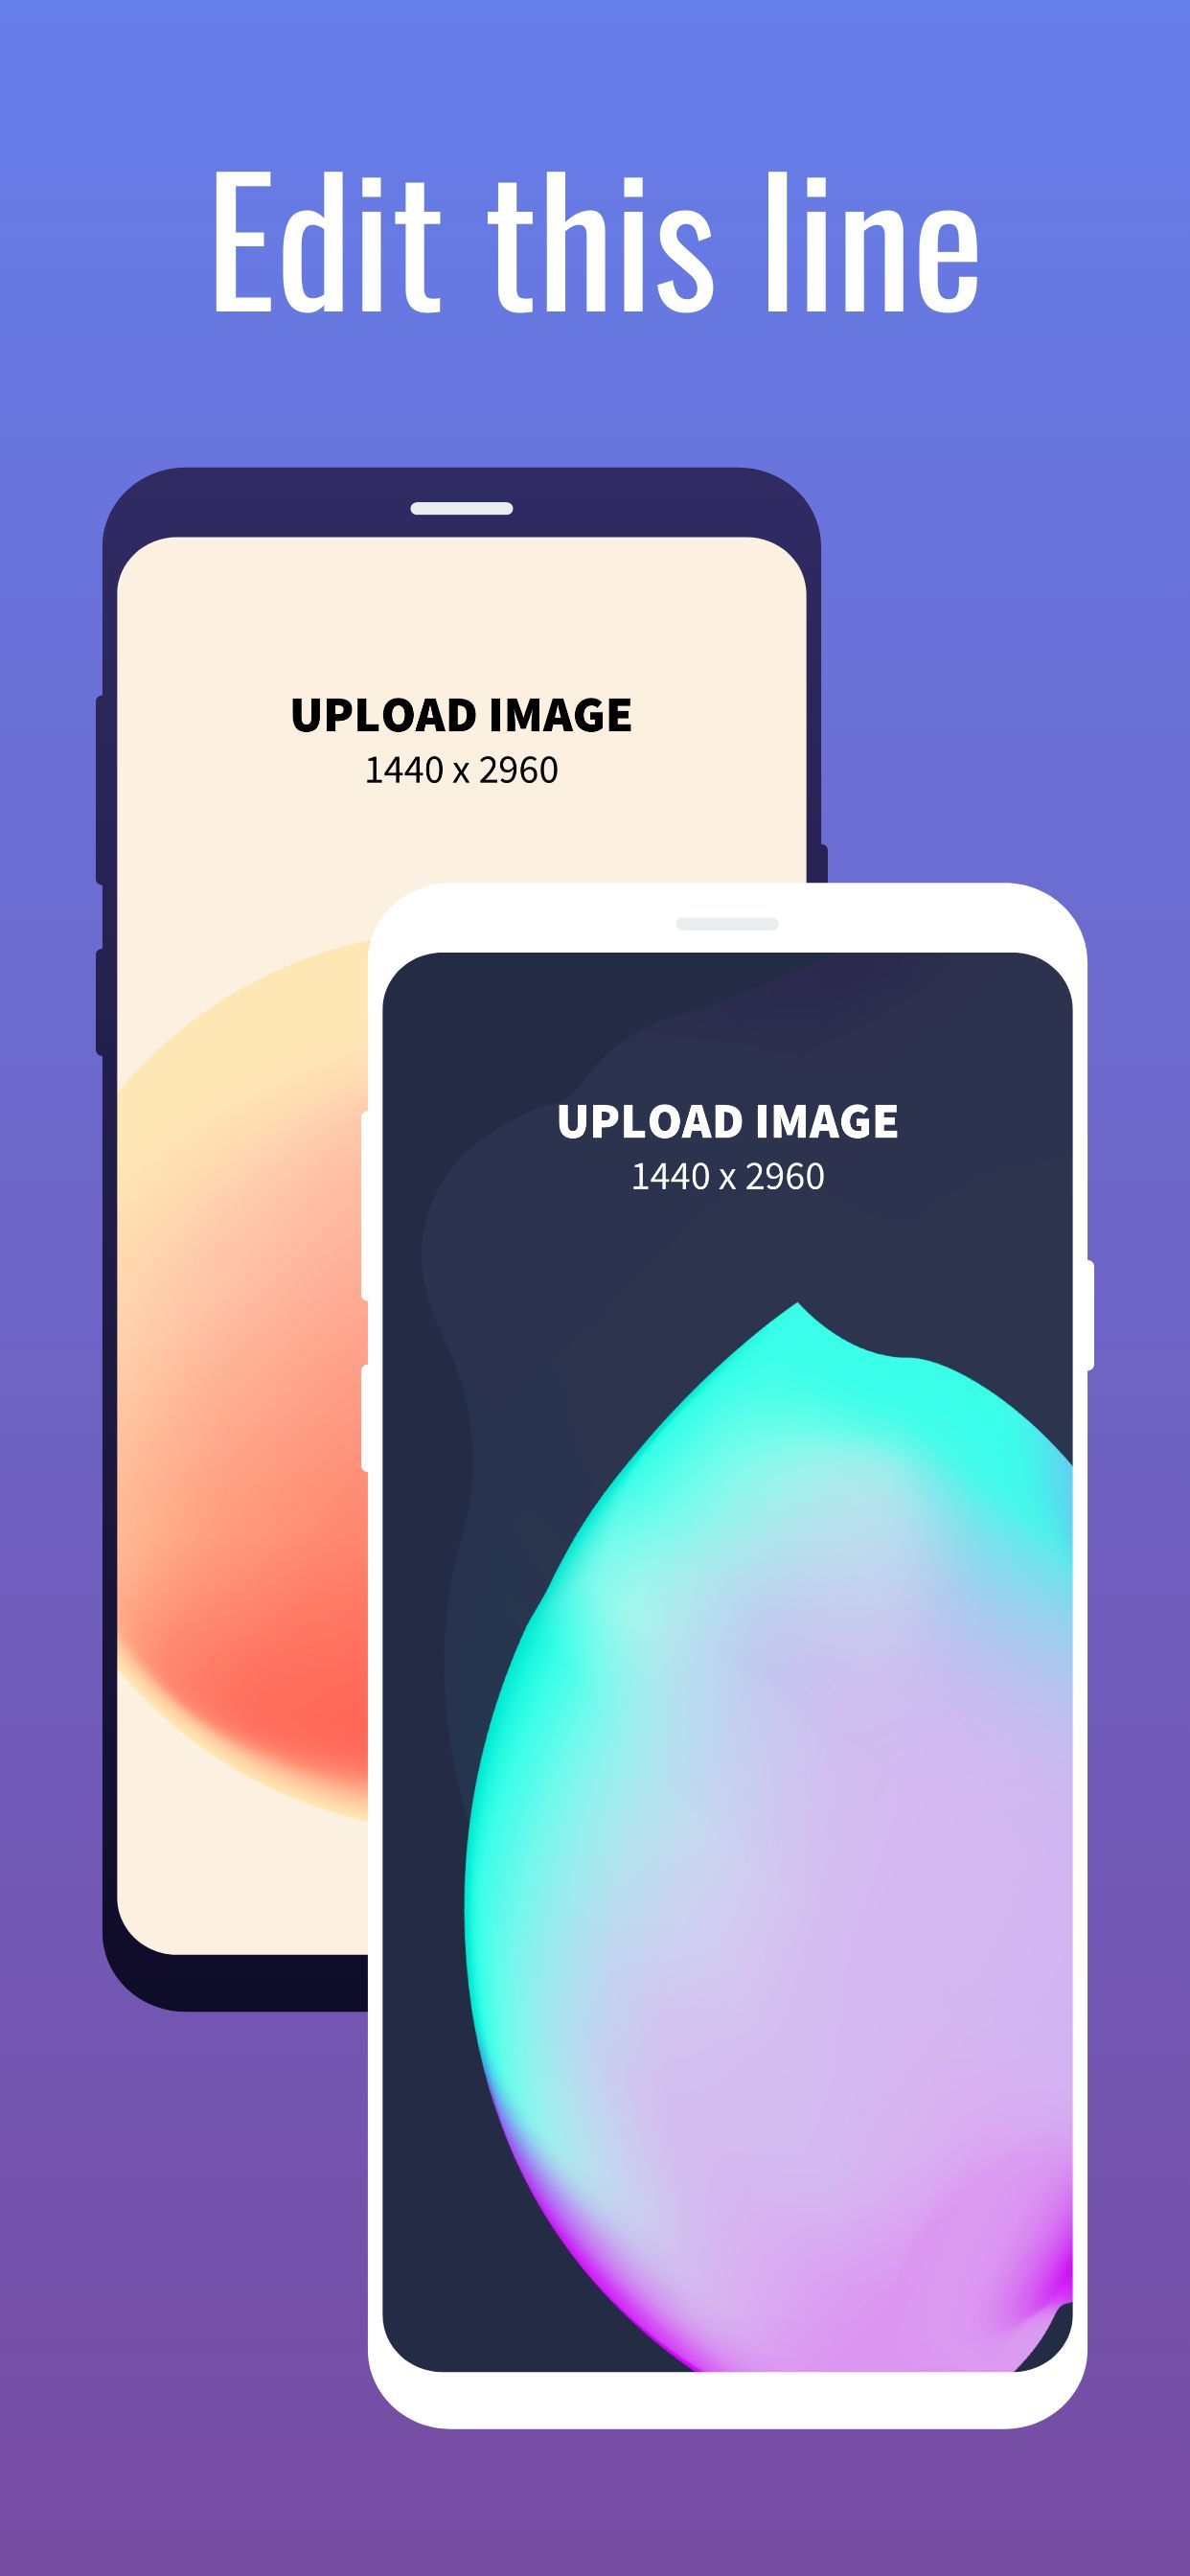 Samsung S9 Screenshot 6 template. Quickly edit text, colors, images, and more for free.